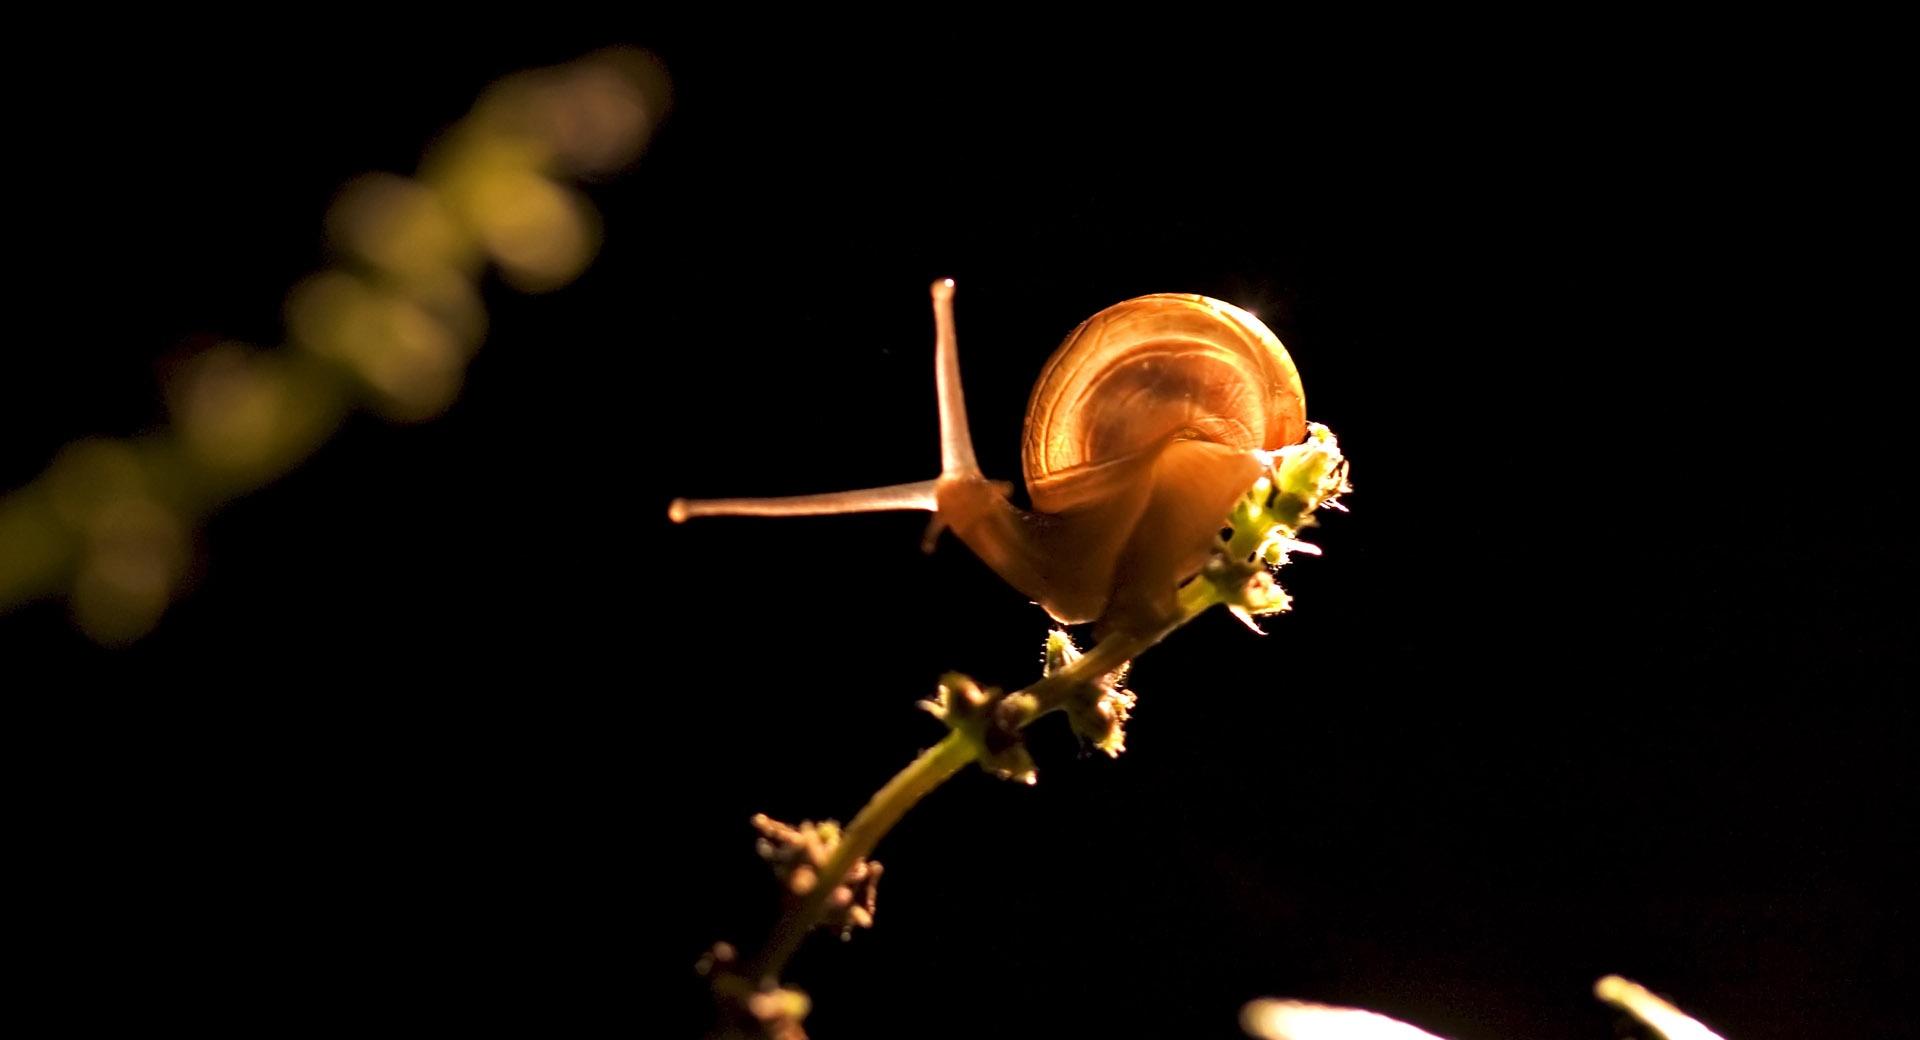 Snail On Branch wallpapers HD quality